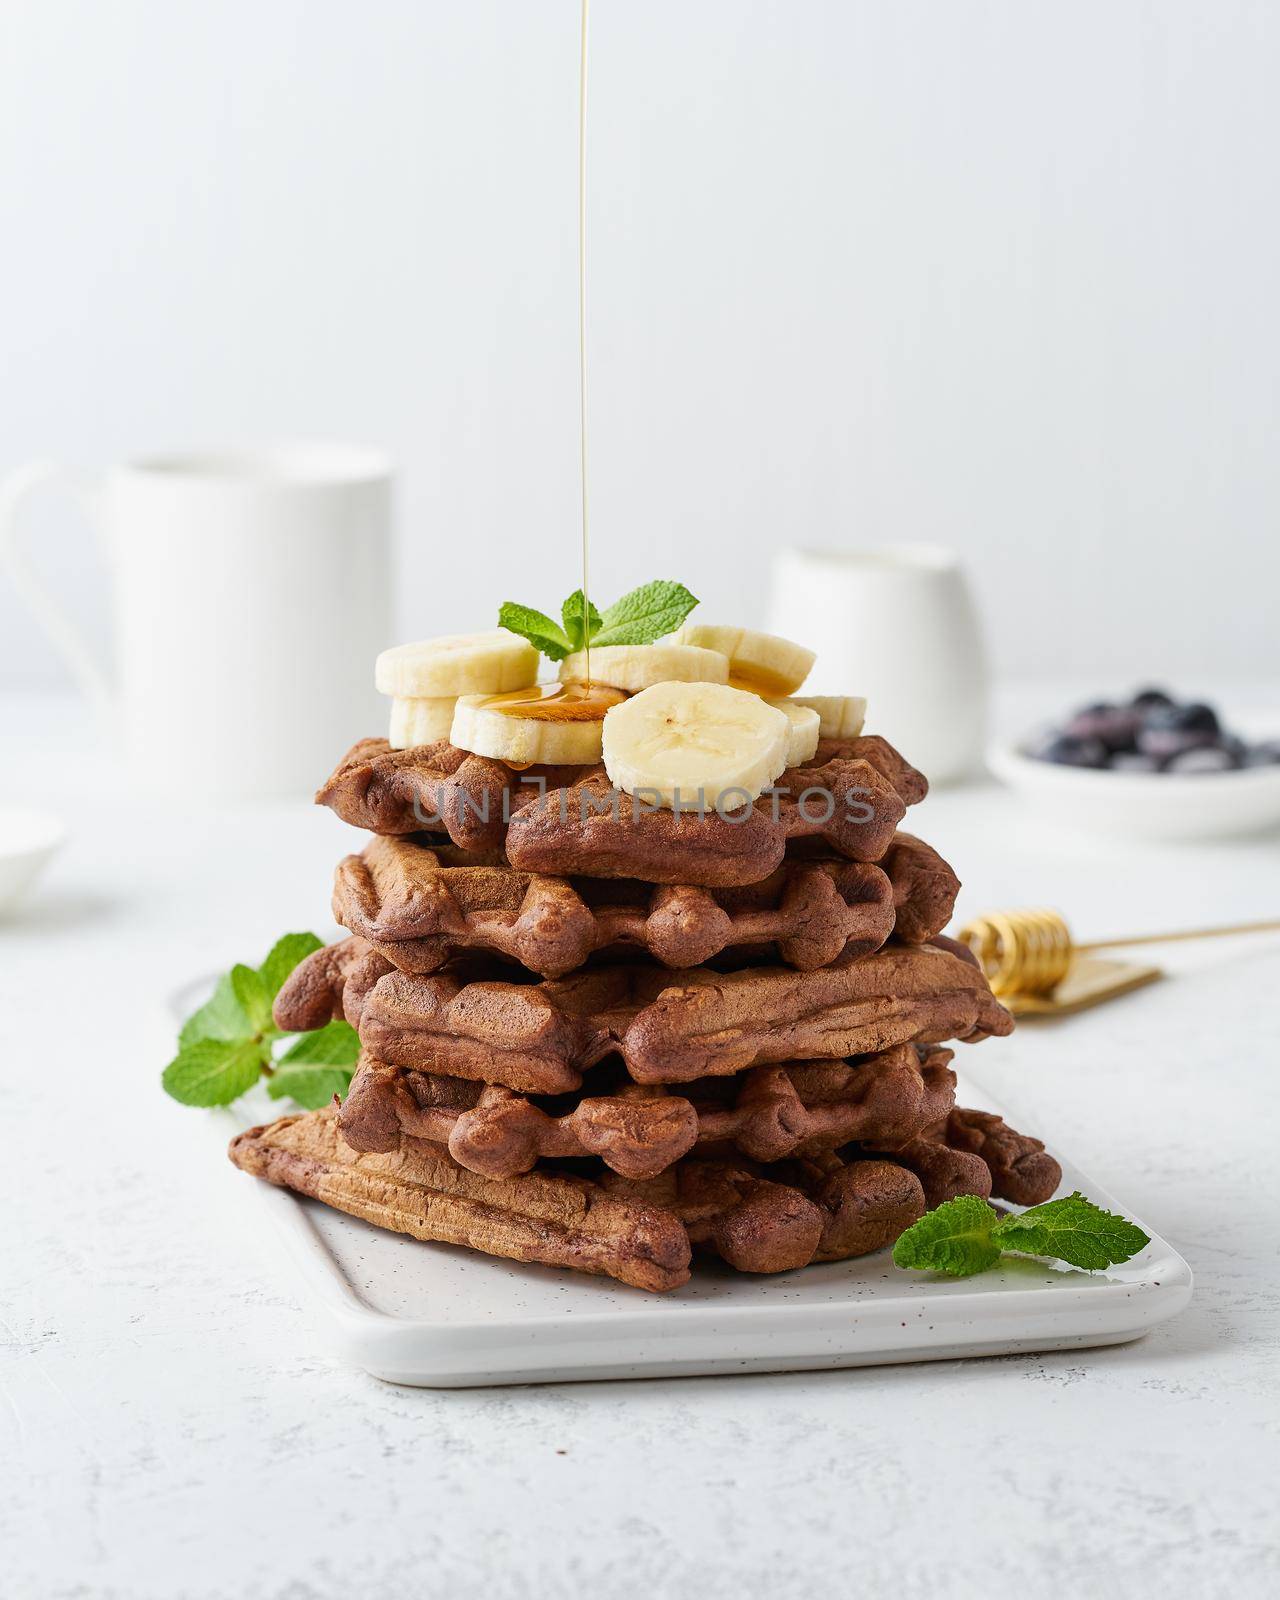 Chocolate banana waffles with maple syrup on white table, side view, vertical. Sweet brunch, a maple syrup flow.